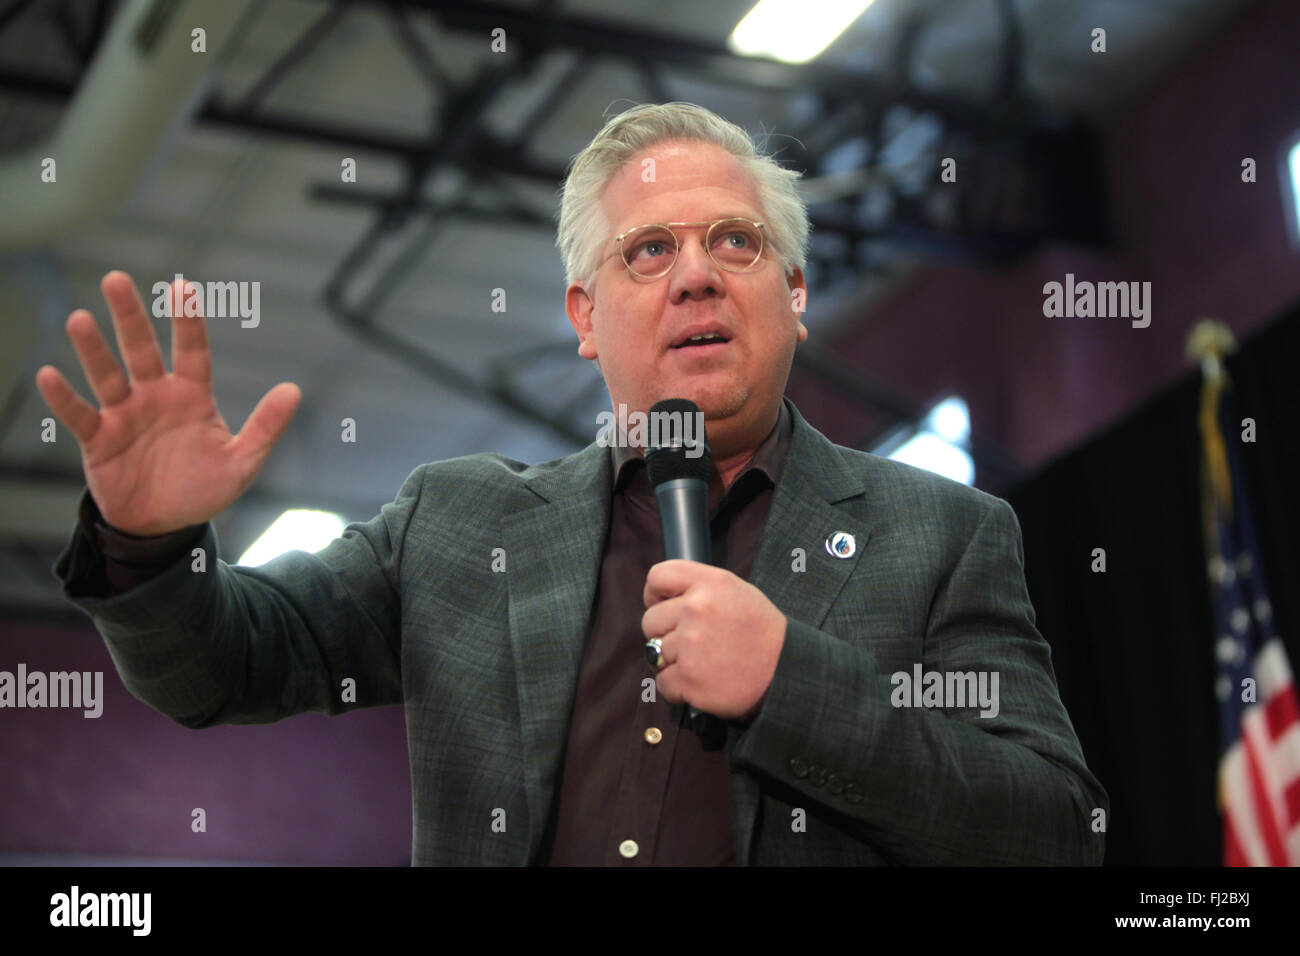 Conservative commentator Glenn Beck speaking at a rally for Republican presidential candidate Senator Ted Cruz at the Durango Hills Community Center February 22, 2016 in Summerlin, Nevada. Stock Photo